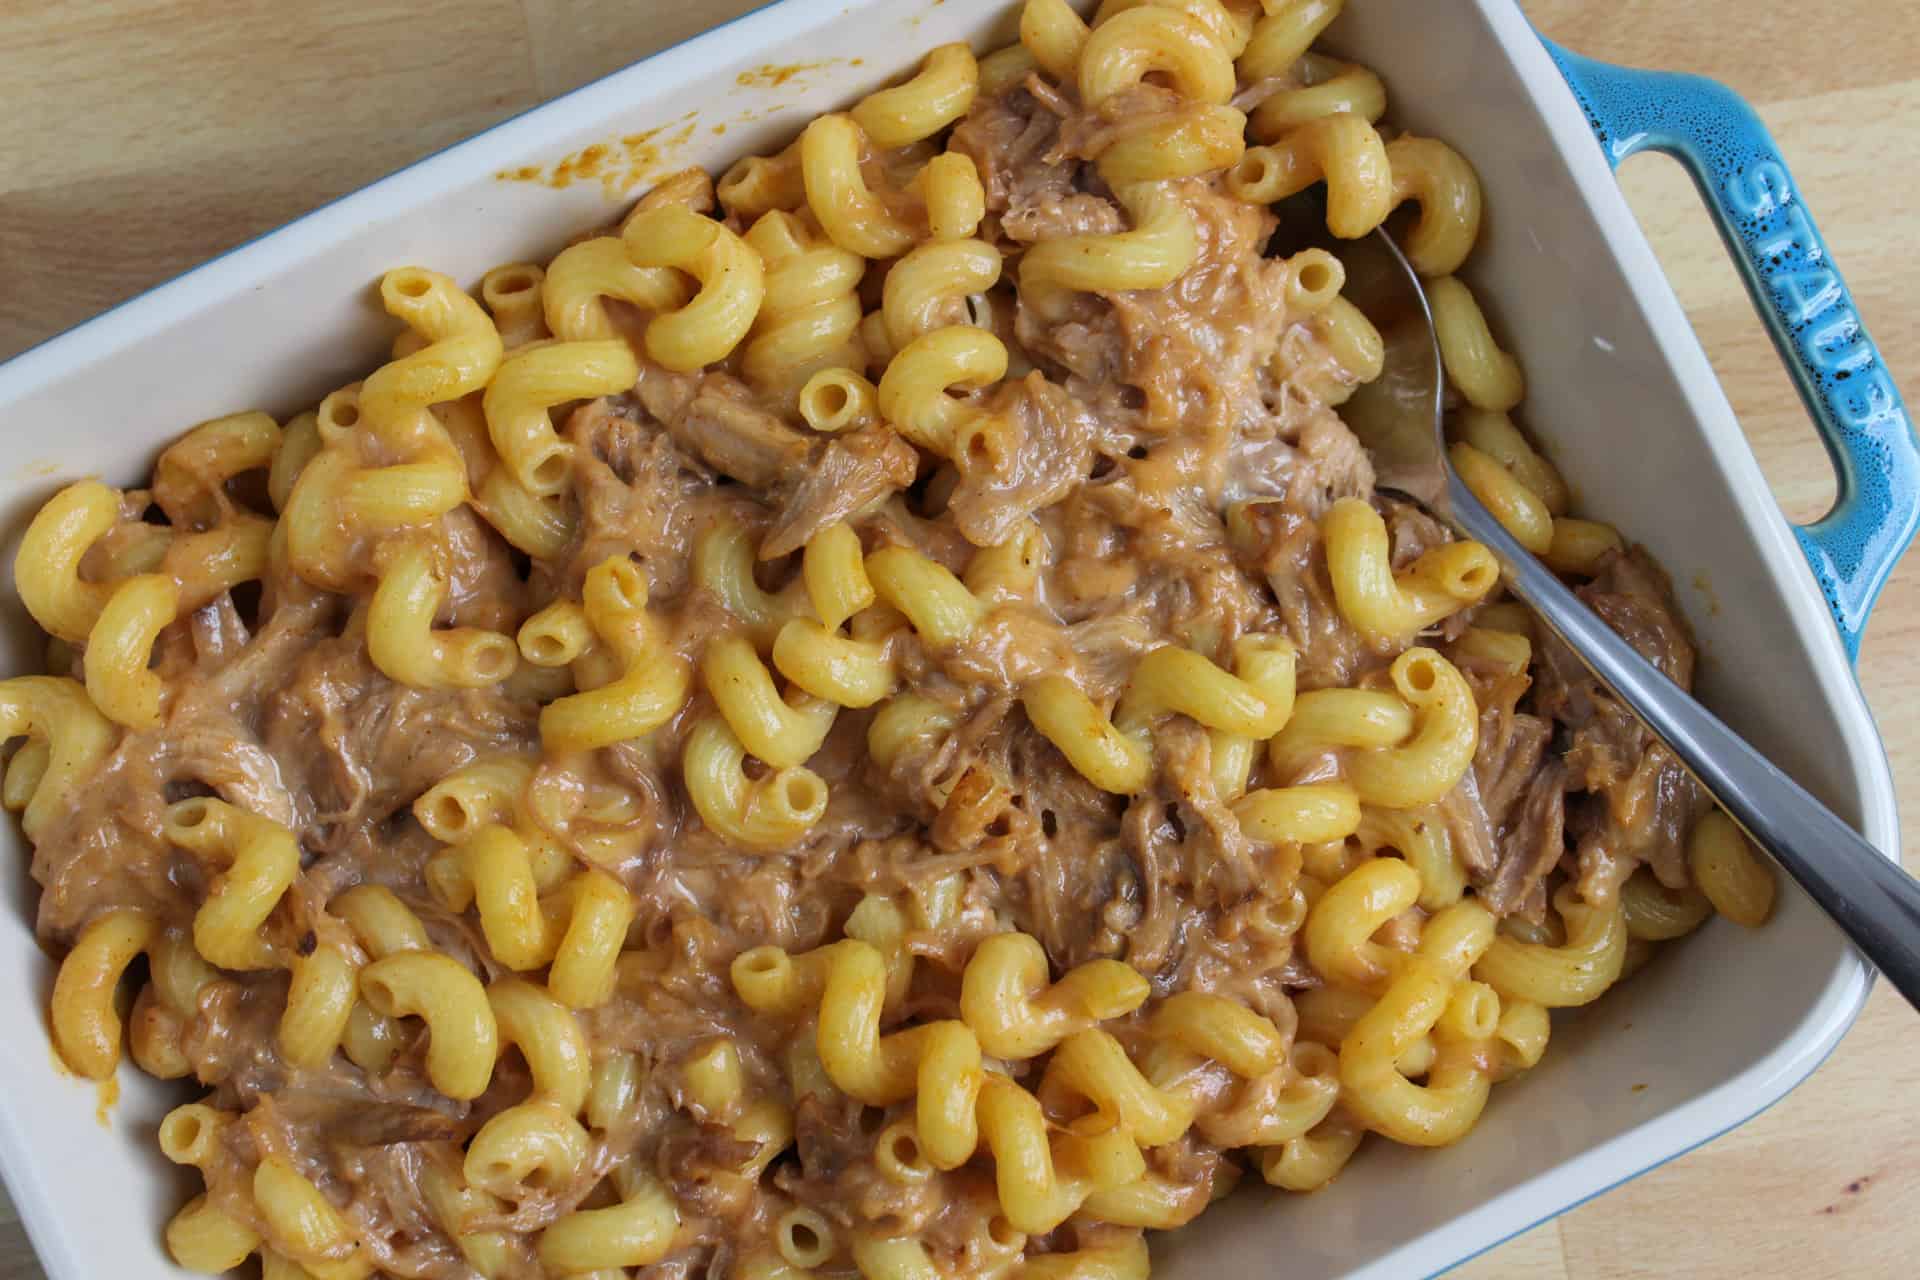 A batch of bbq pulled pork mac and cheese.